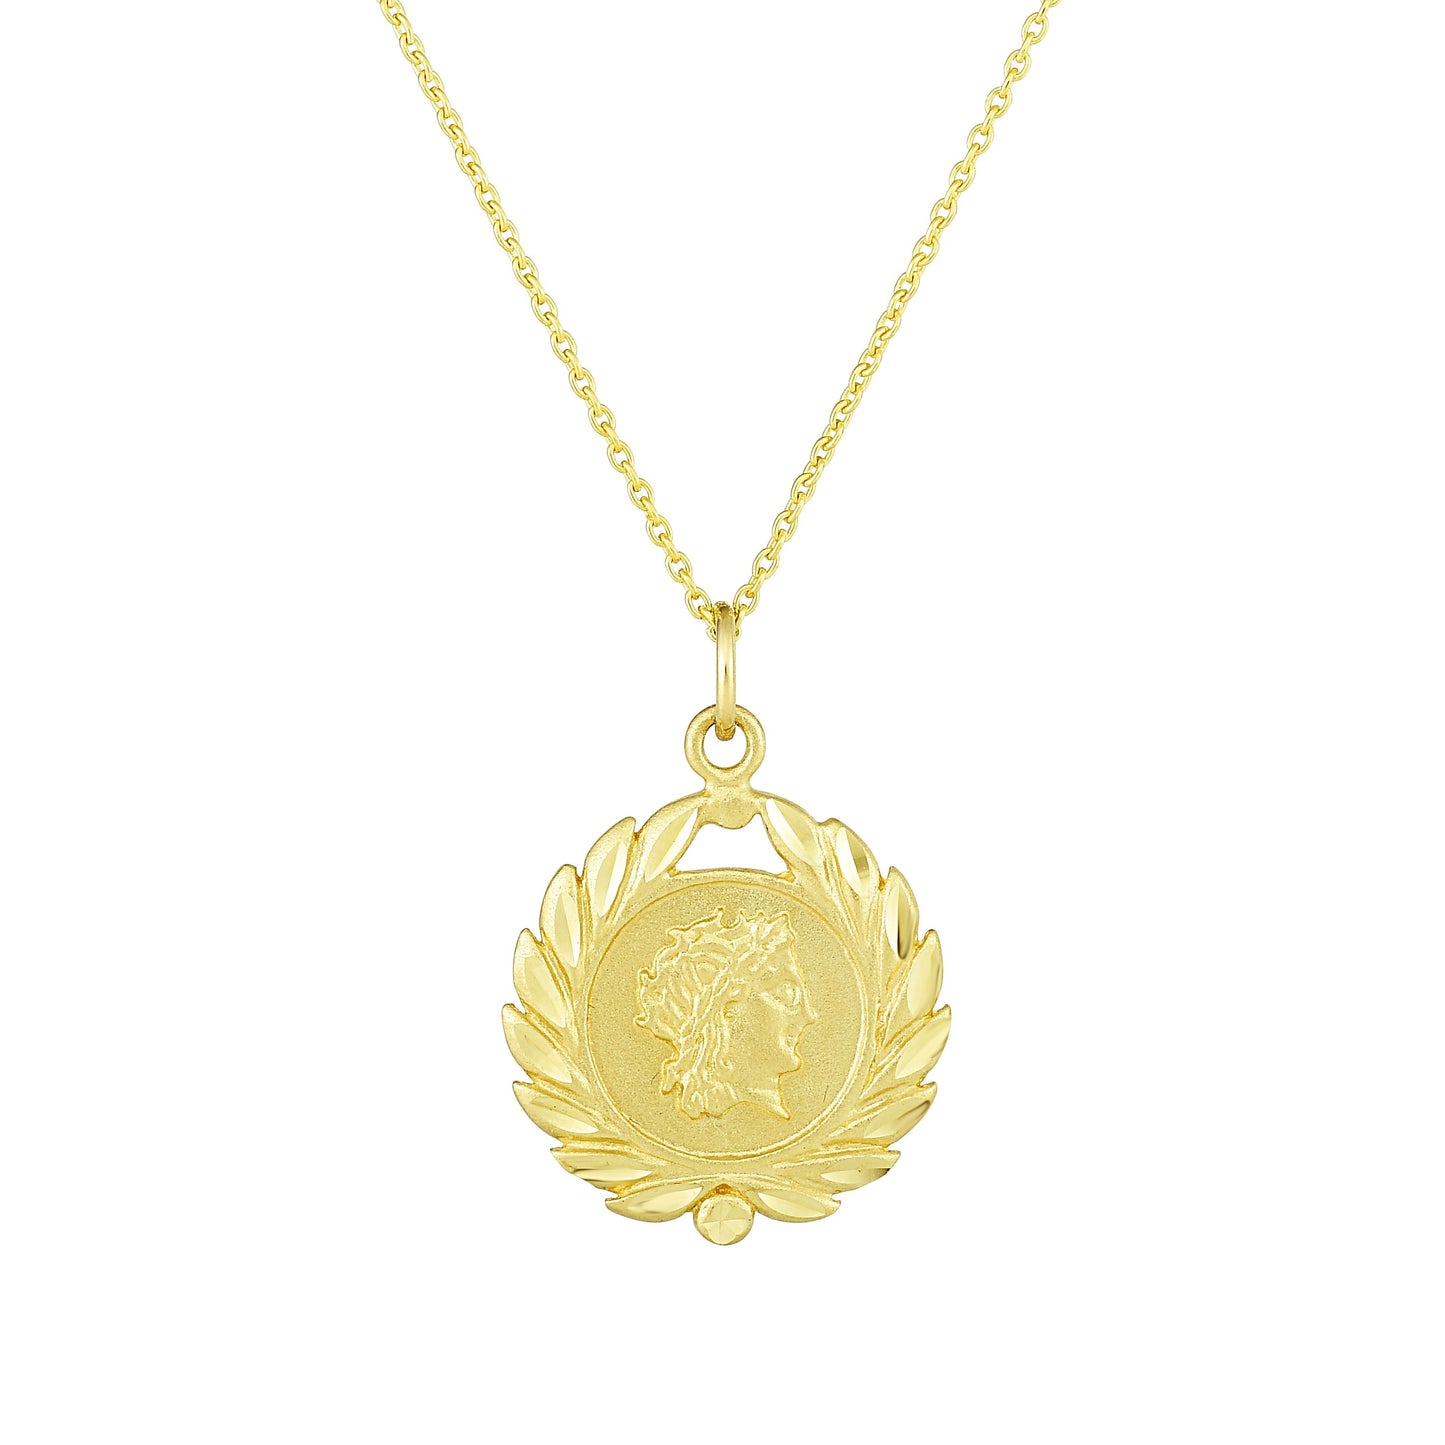 14K Gold Roman Coin & Leaf Inspired Necklace